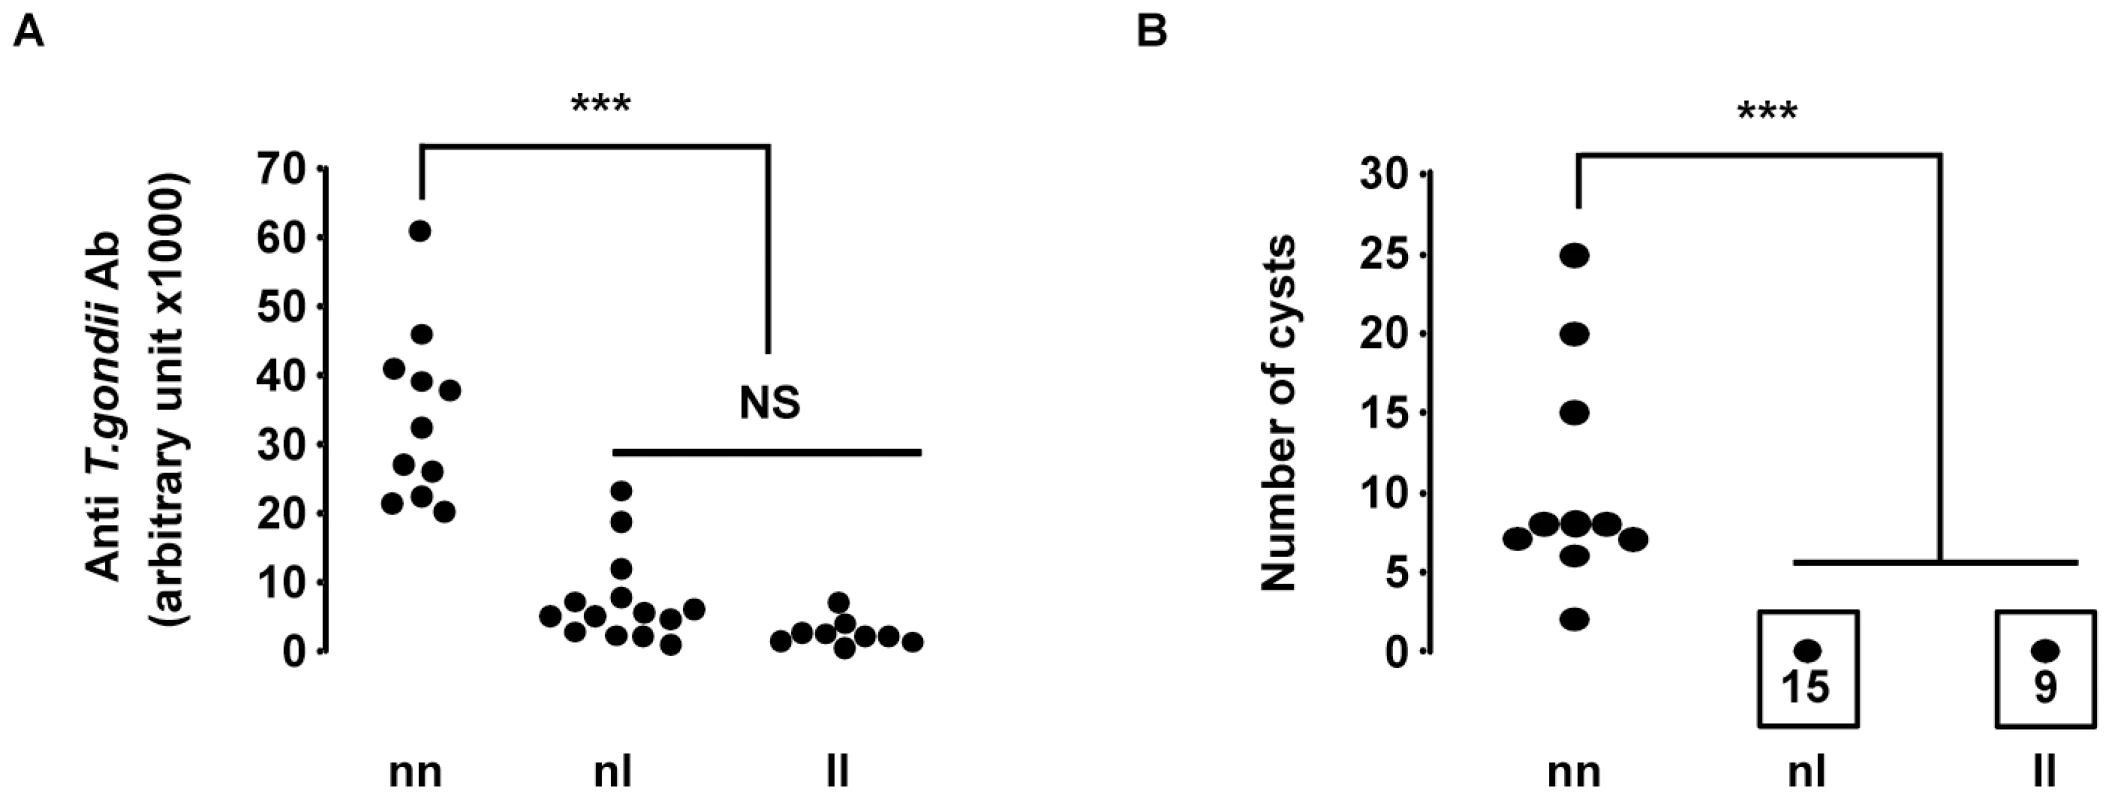 Susceptibility to <i>T. gondii</i> infection of (LOU X BN) F2 rats according to their genotype at the D10GF41 microsatellite marker.